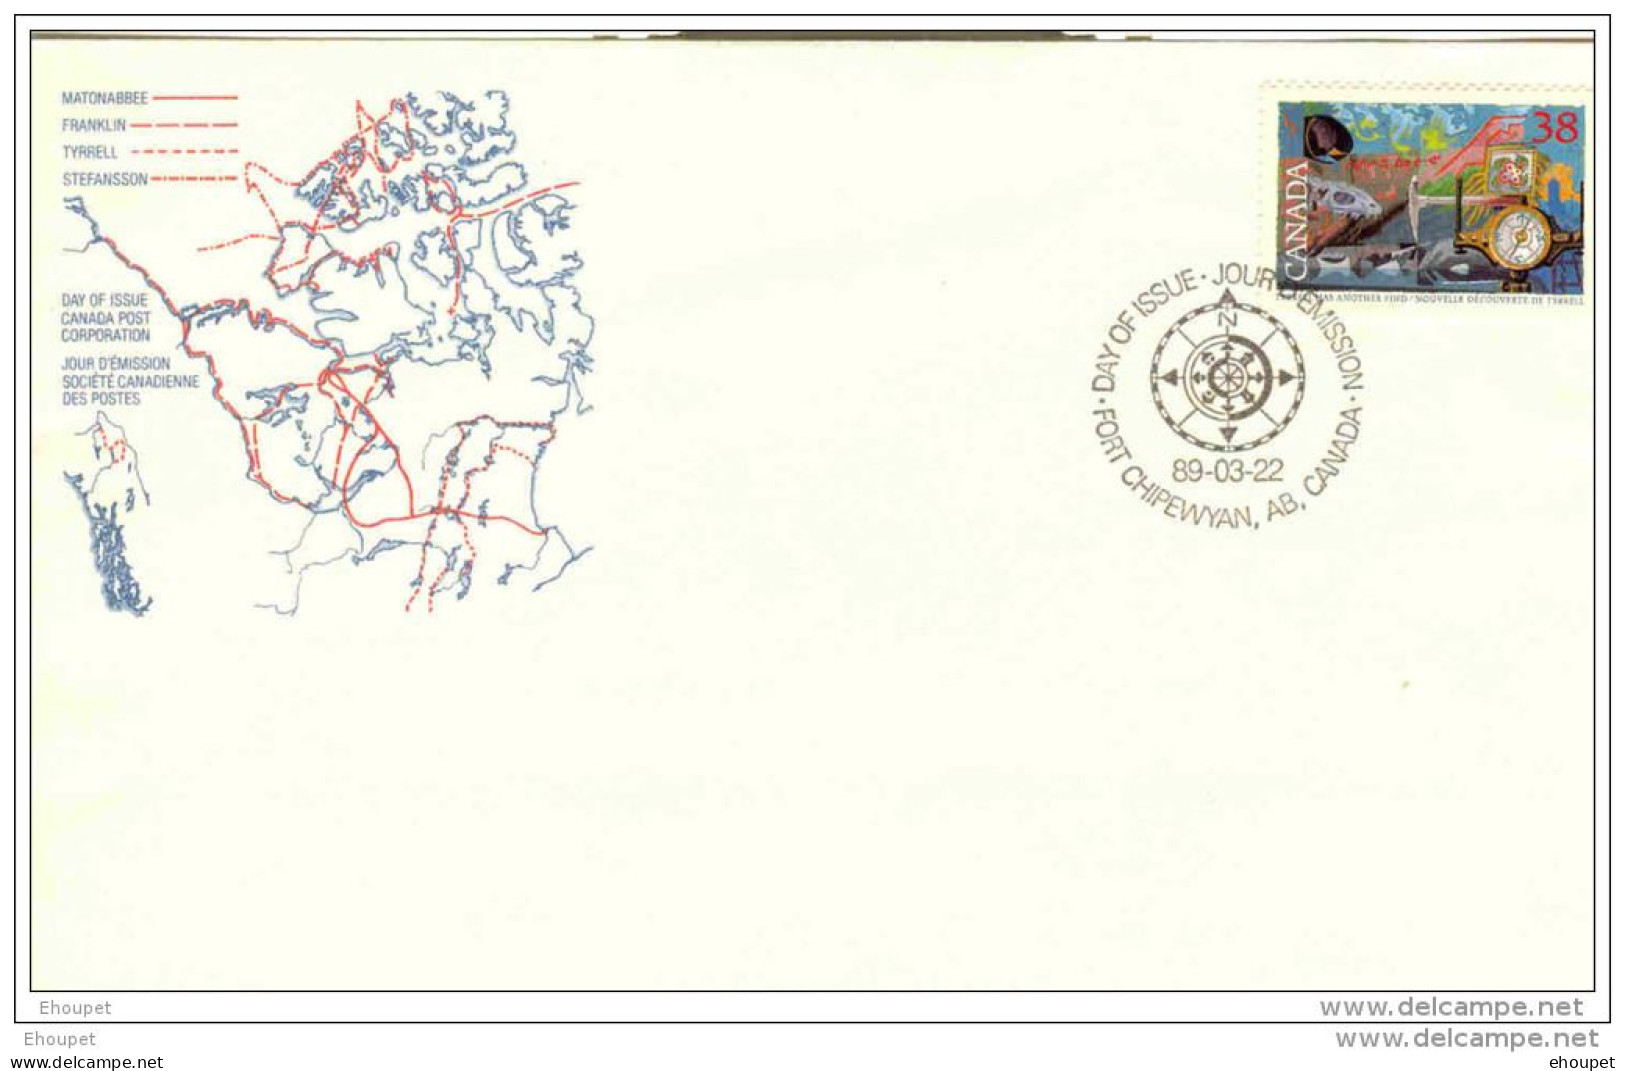 FDC 22 MARS 1989 EXPEDITION TYRELL - 1981-1990